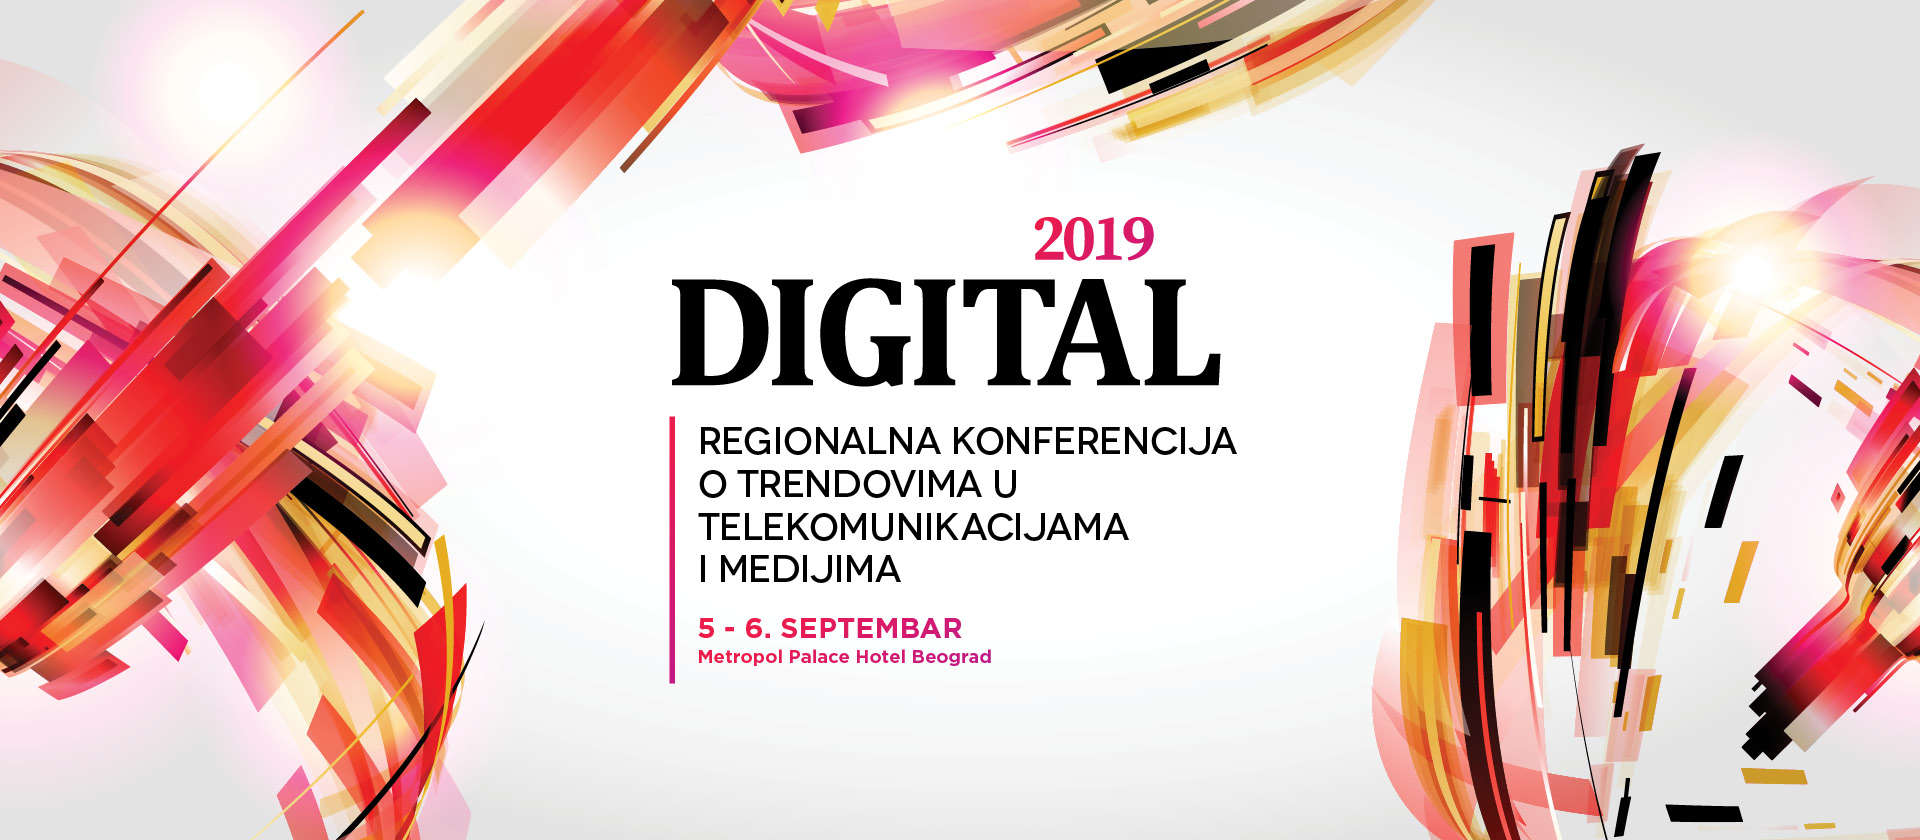 Welcome to #Digital conference on September 5-6 in Belgrade